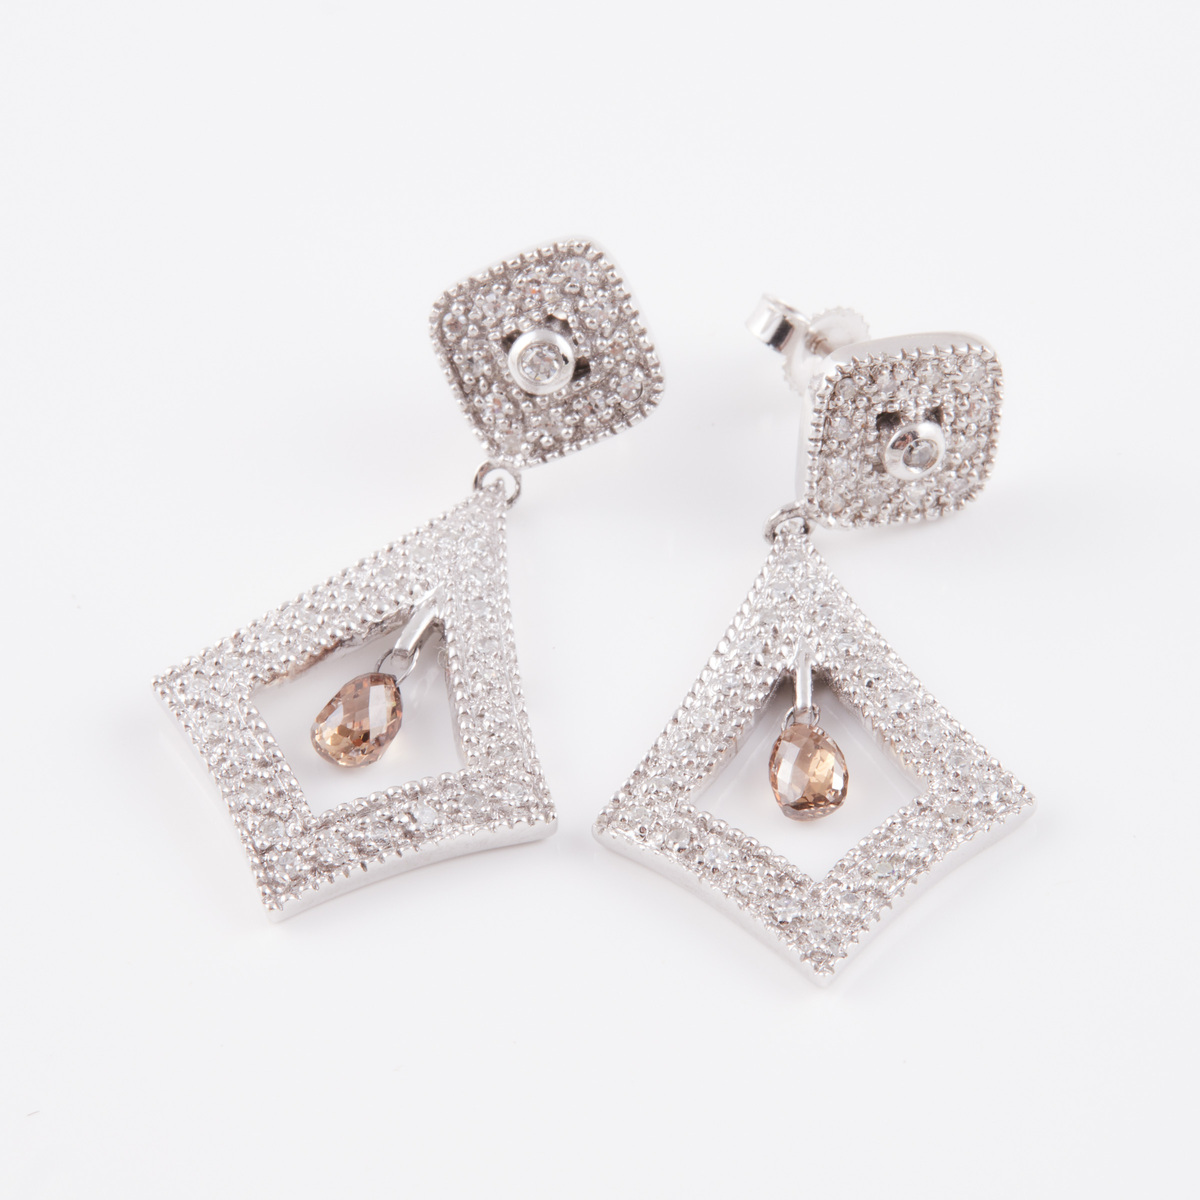 Pair Of 14k White Gold Drop Earrings, set with 2 briolette cut champagne diamonds, and numerous smal